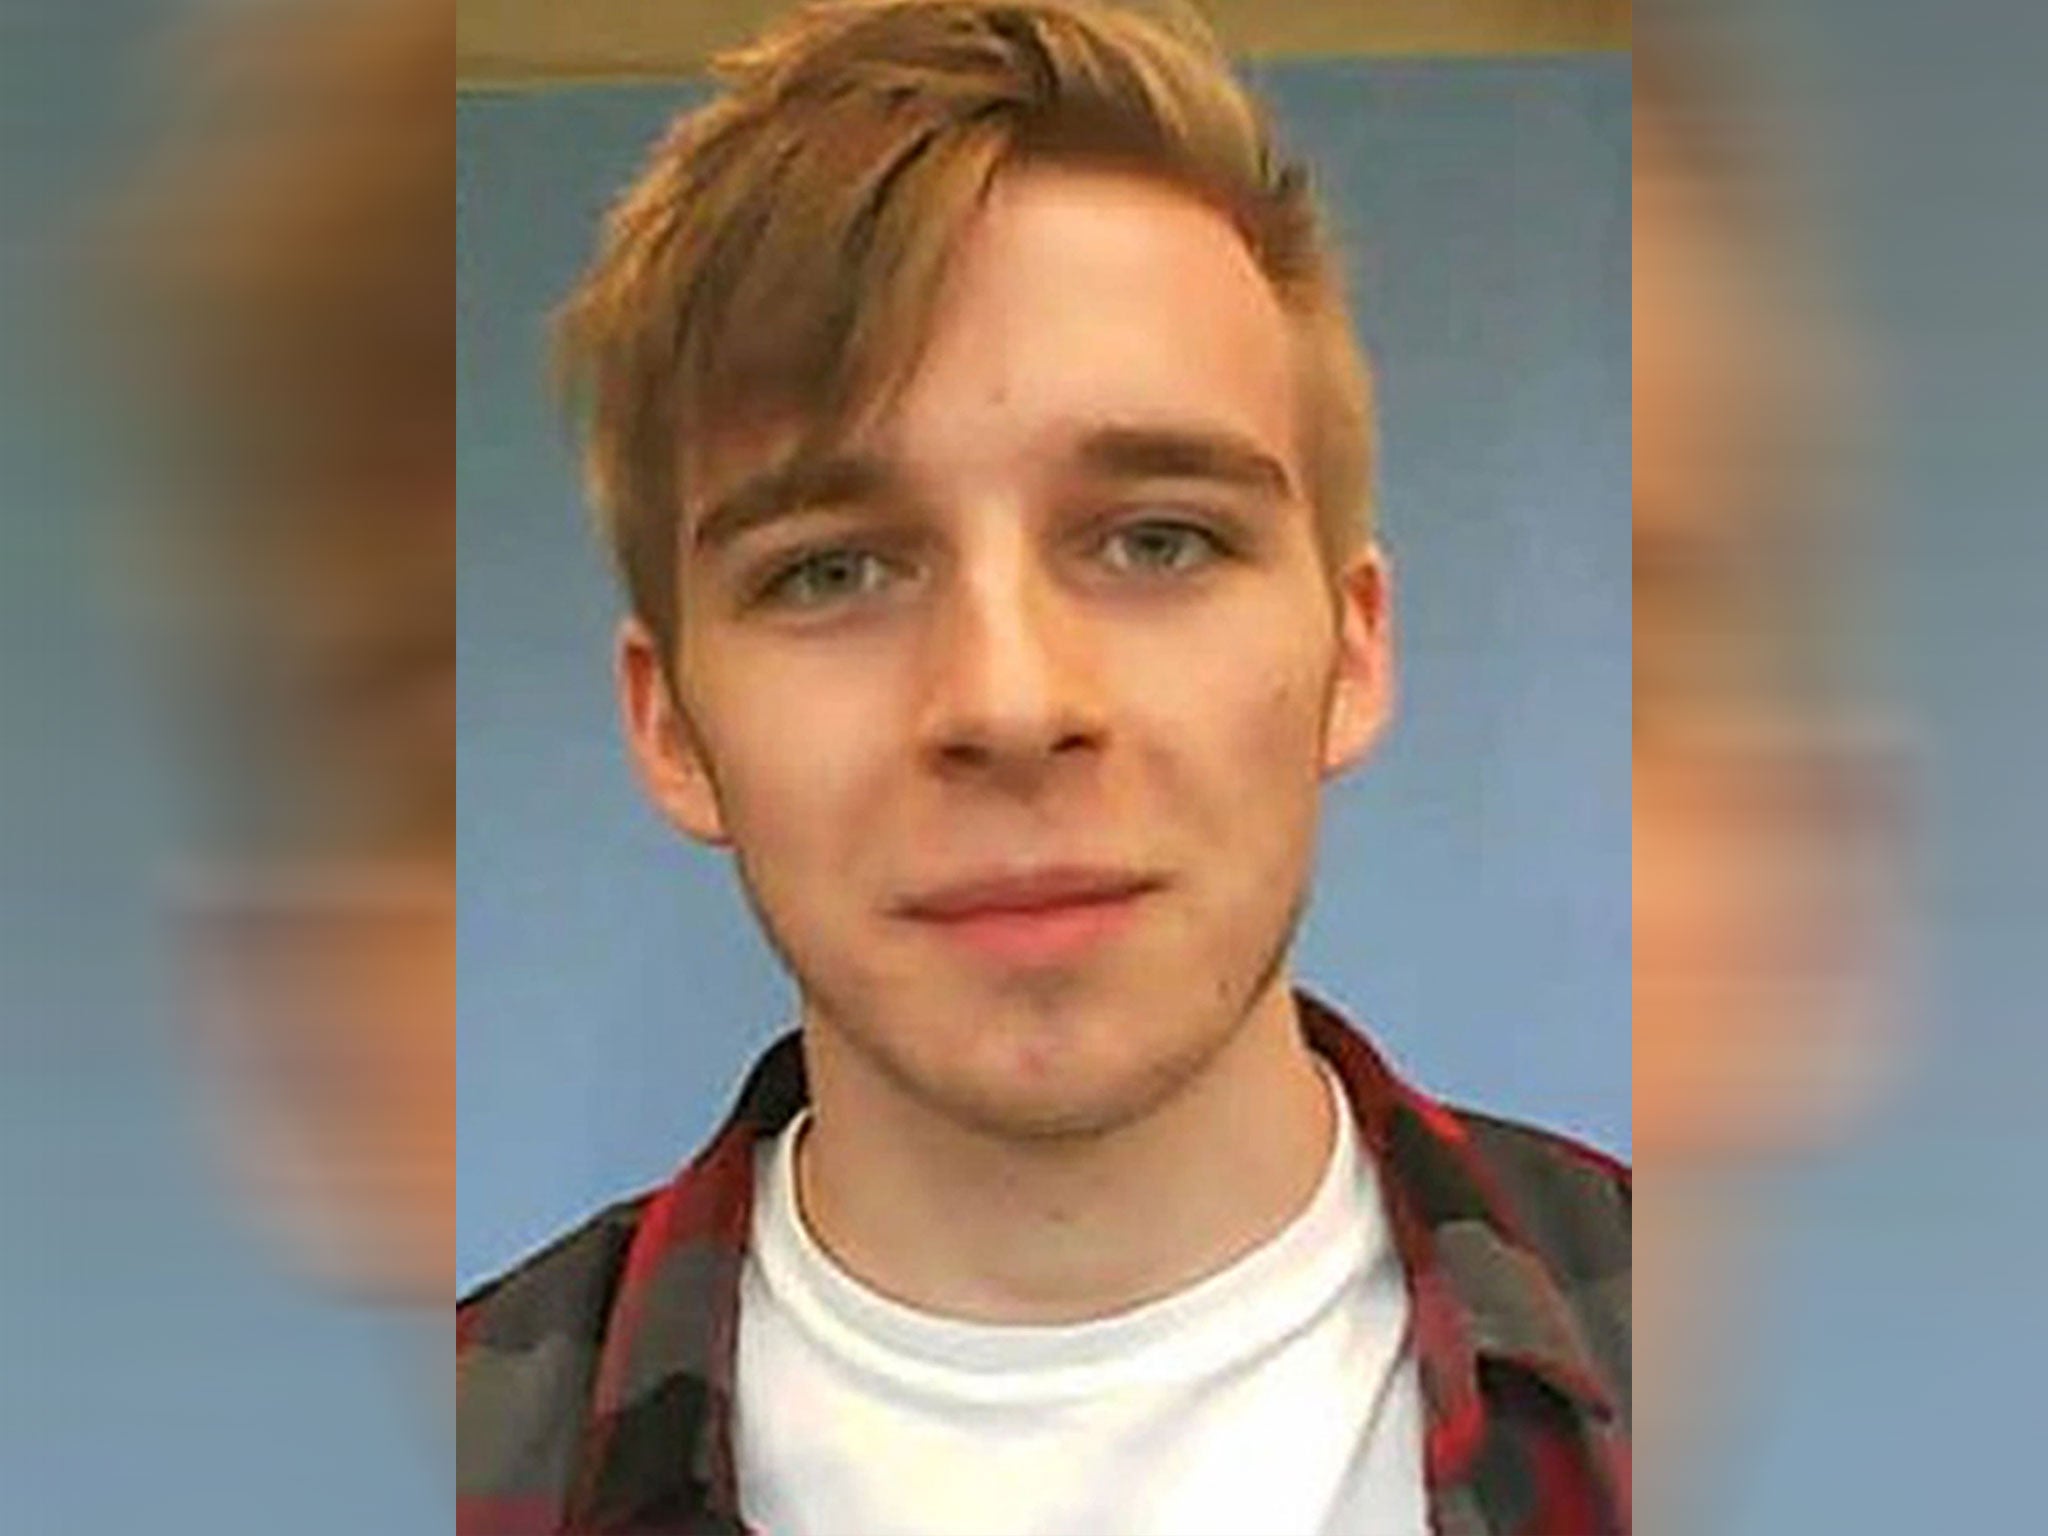 Missing teenage university student Daniel Williams, who disappeared during the early hours of Thursday